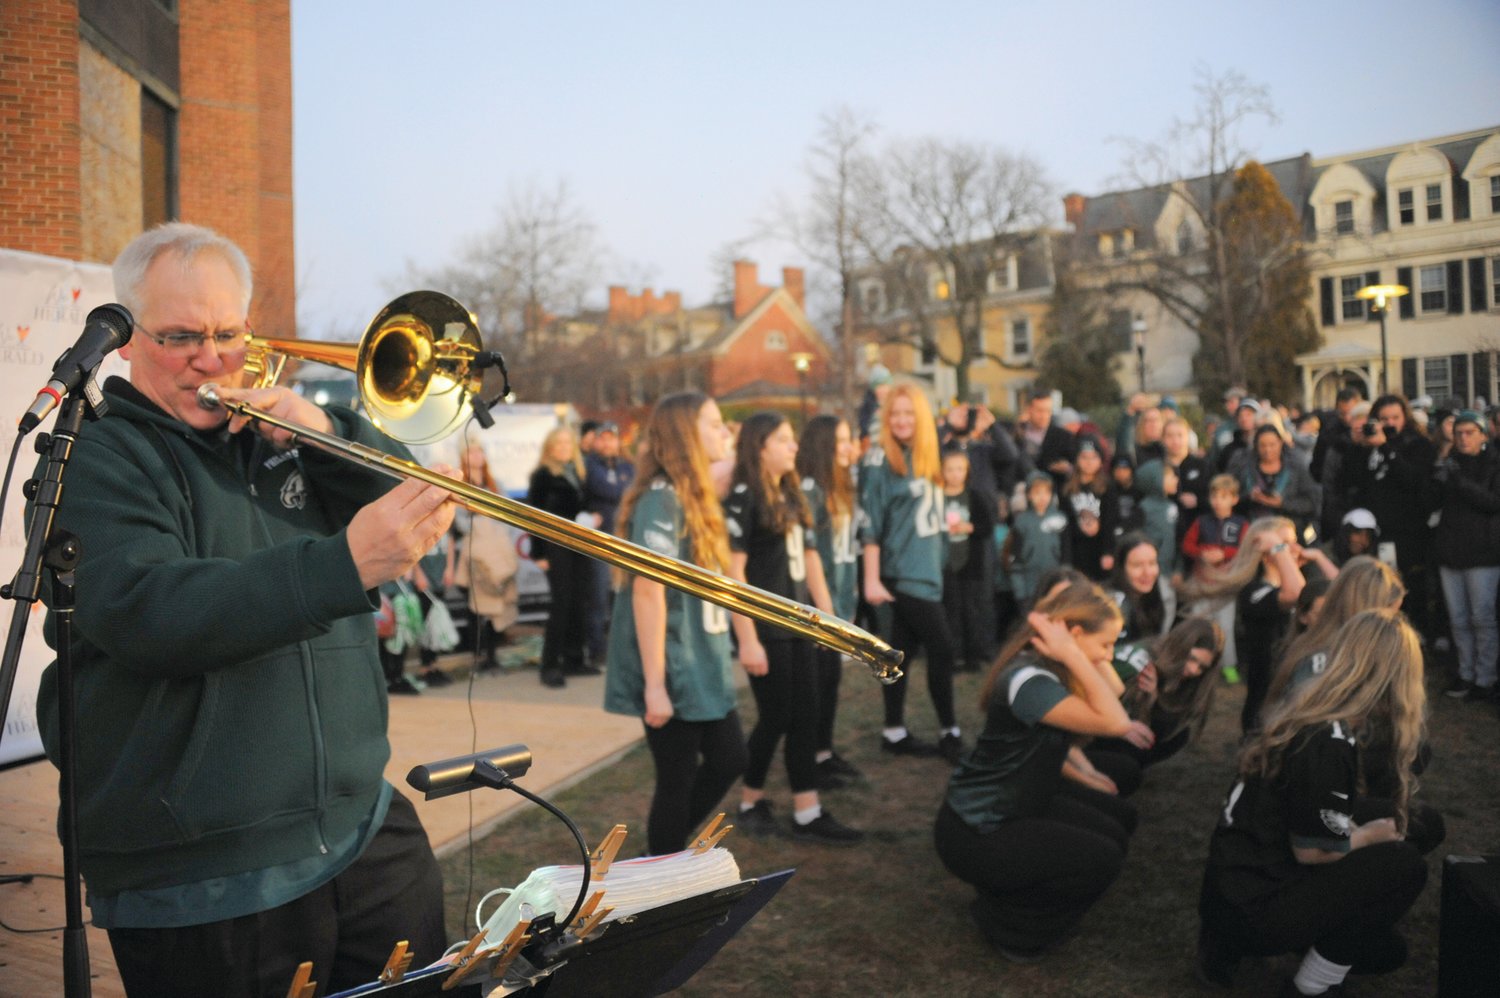 The Galena Brass Band belts out tunes to keep the crowd entertained as members of the Fitzpatrick Irish Dancers prepare for their performance Friday evening at the Herald’s “Bucks County Loves the Birds” pep rally on the lawn of the old county courthouse in Doylestown.